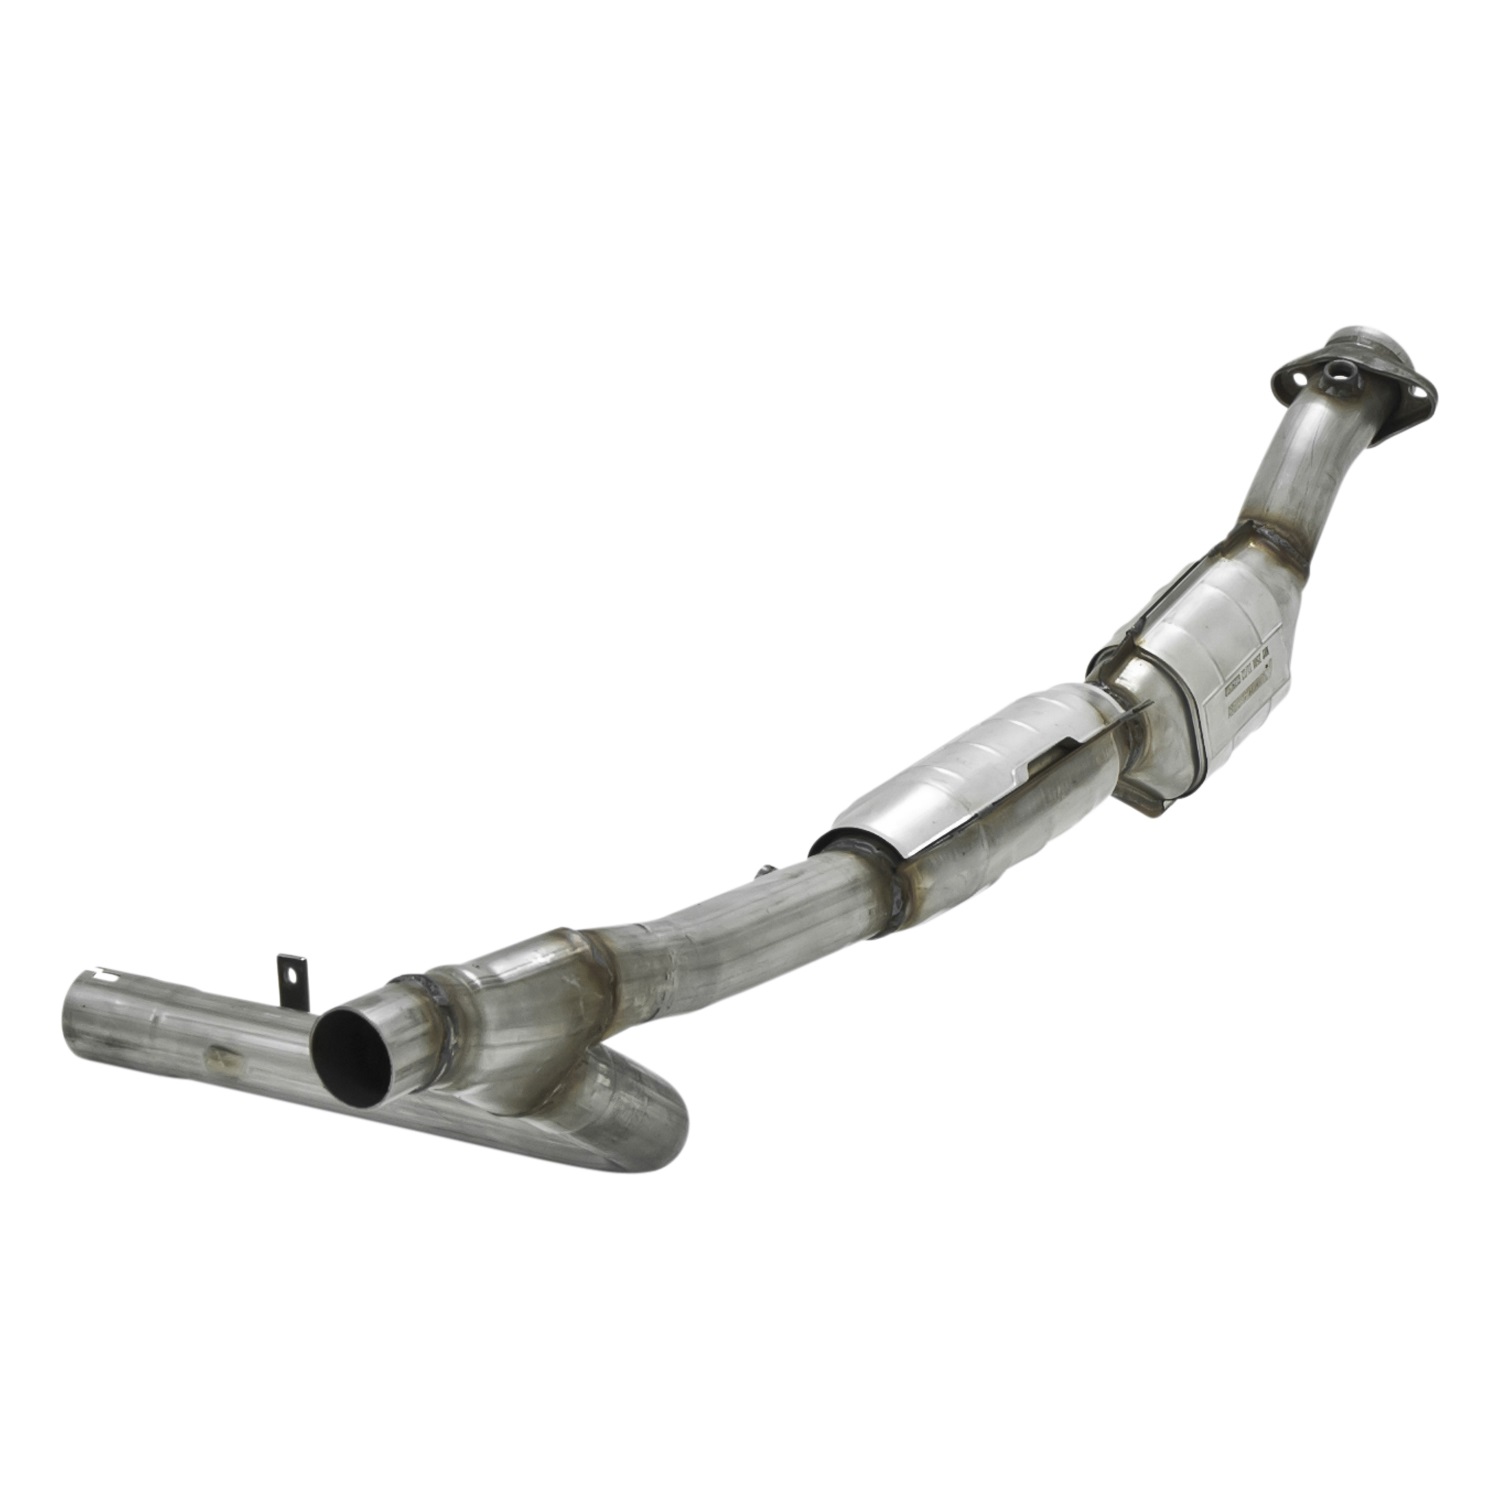 Flowmaster Flowmaster 2020013 Direct Fit Catalytic Converter Fits 97-00 Expedition F-150